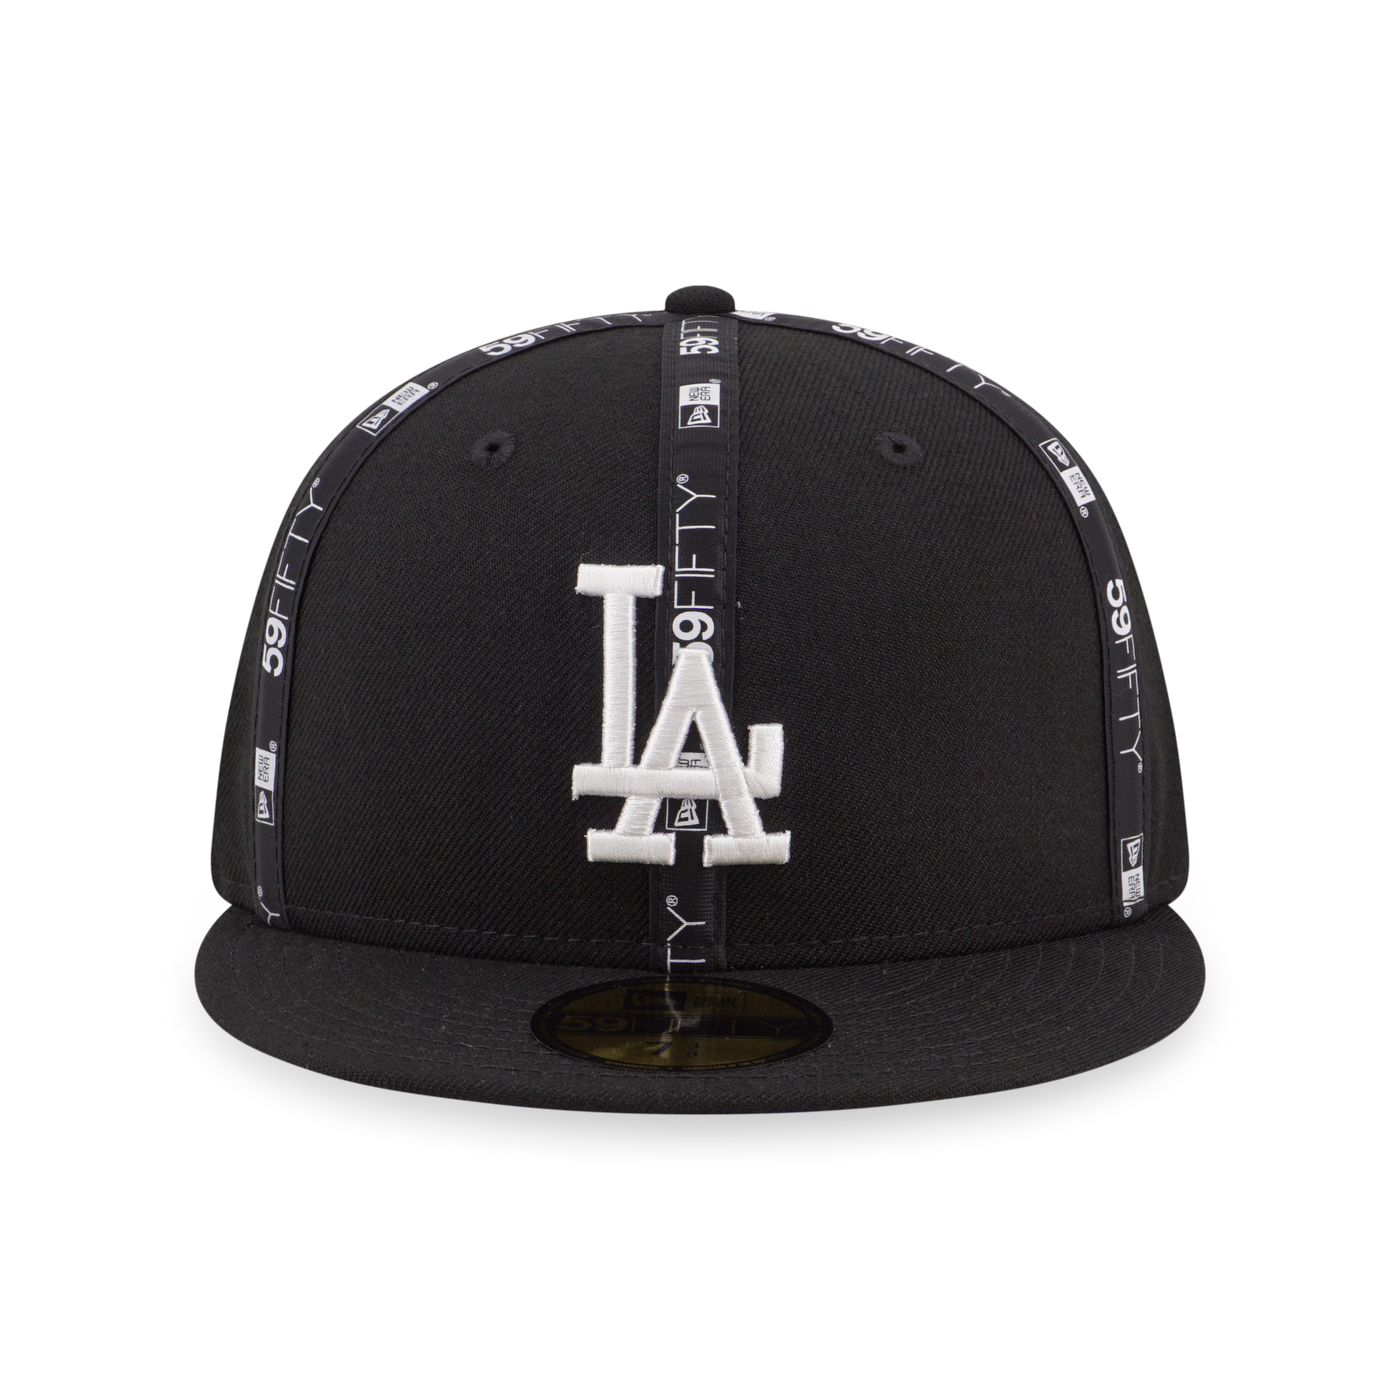 LOS ANGELES DODGERS INSIDE OUT DODGERS BLACK 59FIFTY CAP